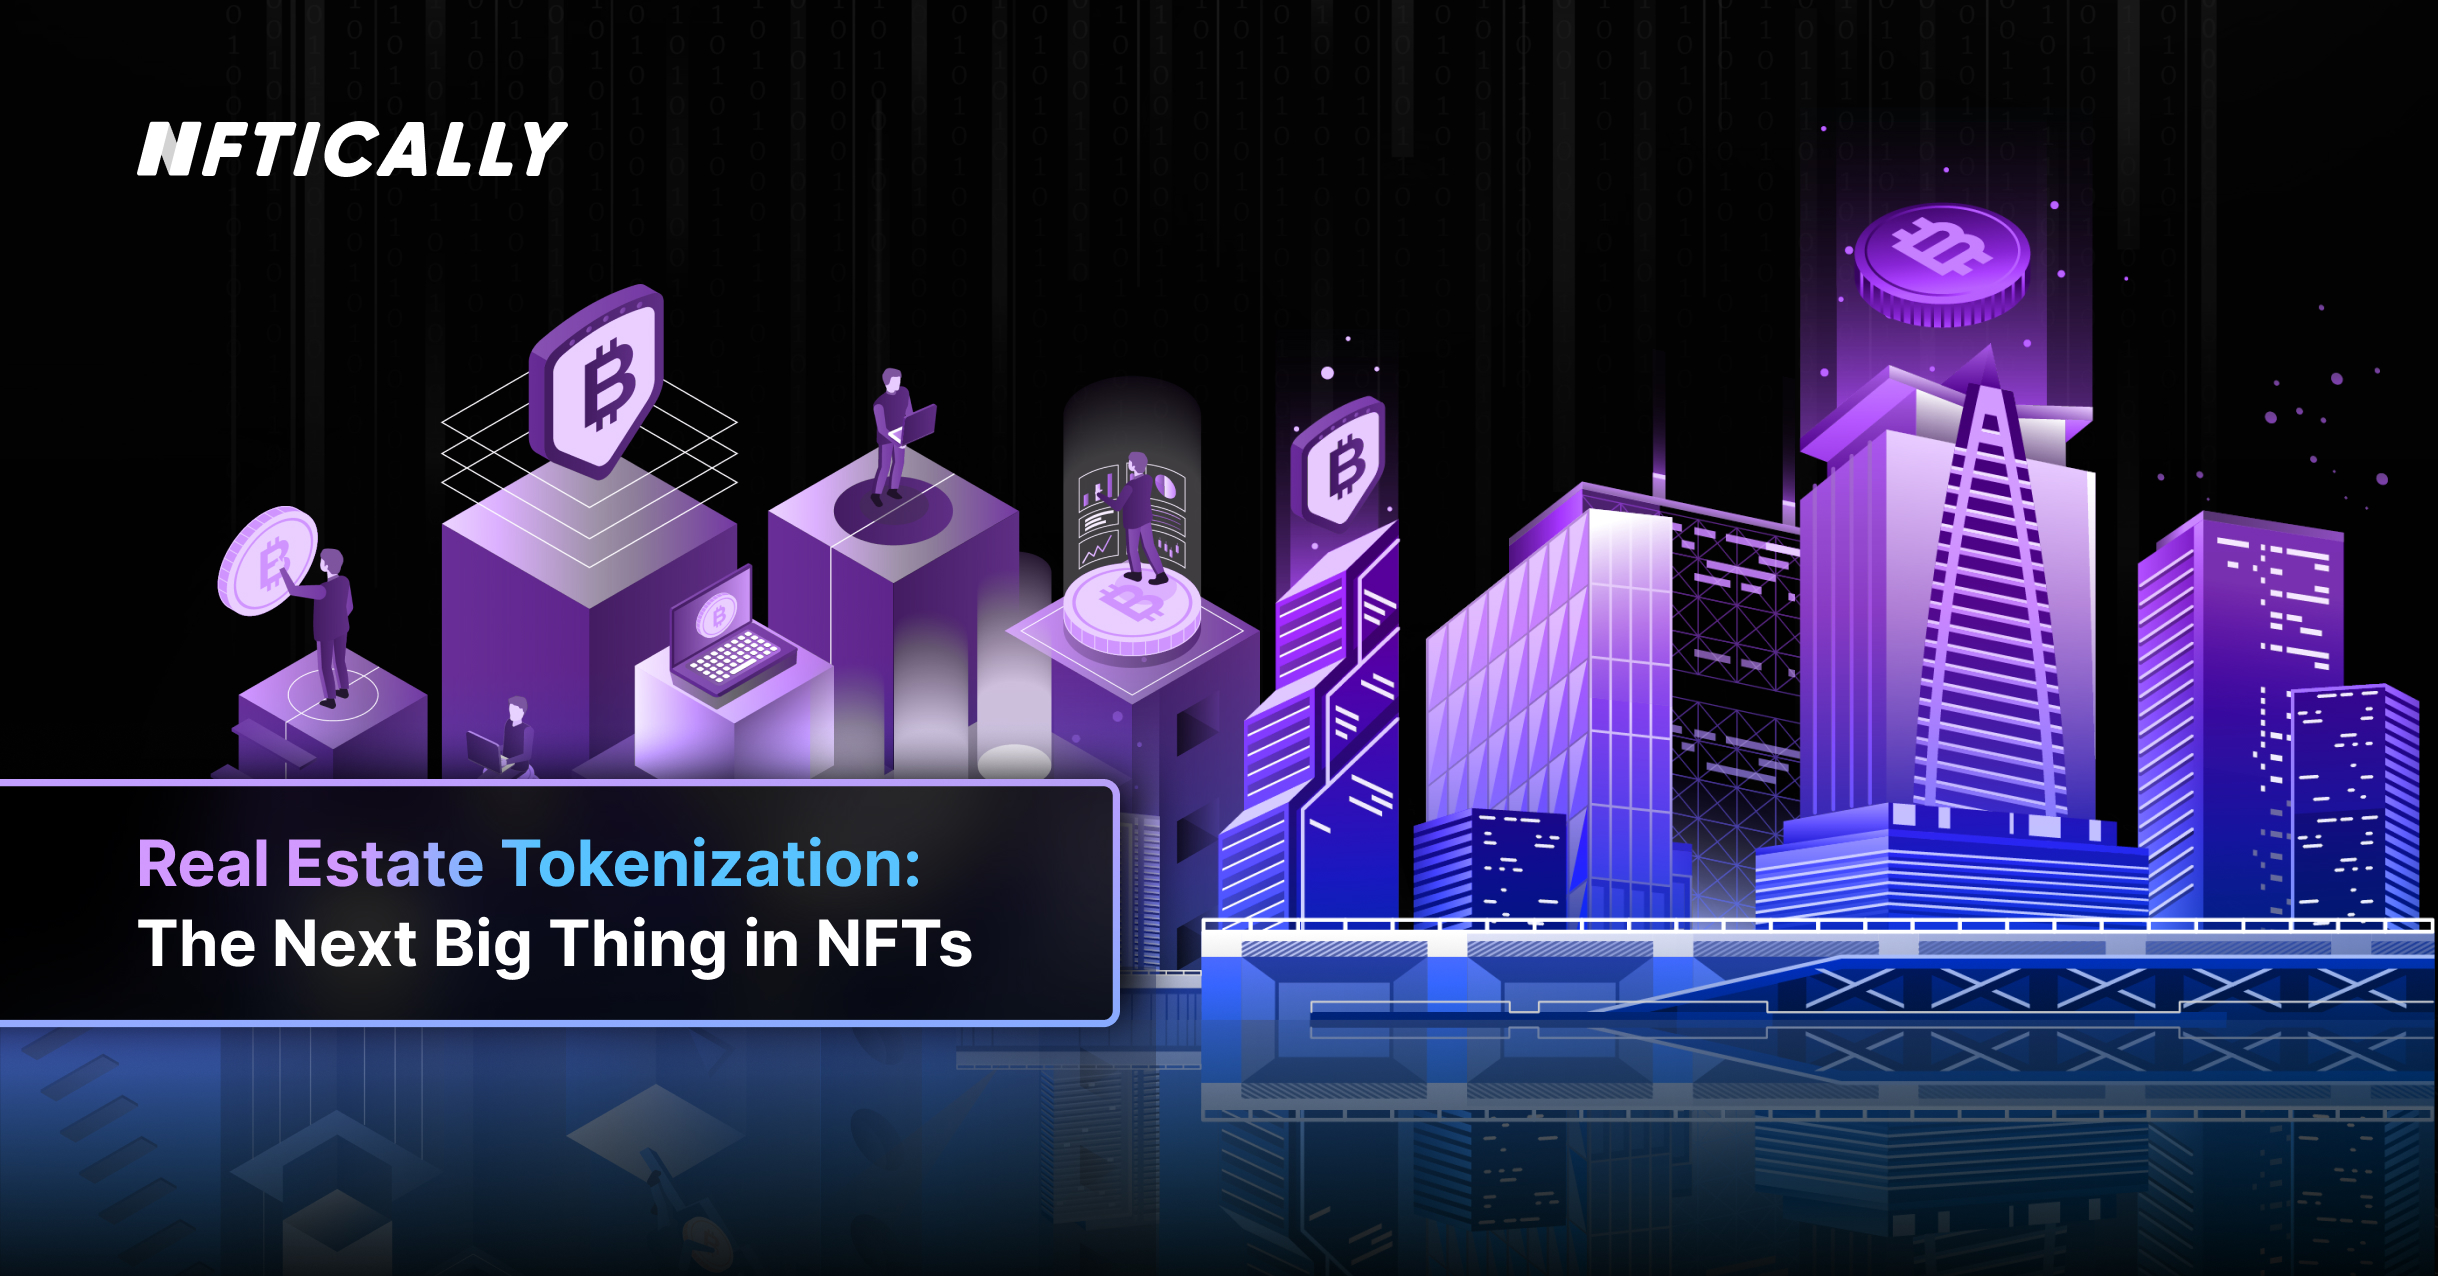 Real Estate Tokenization: The Next Big Thing in NFTs